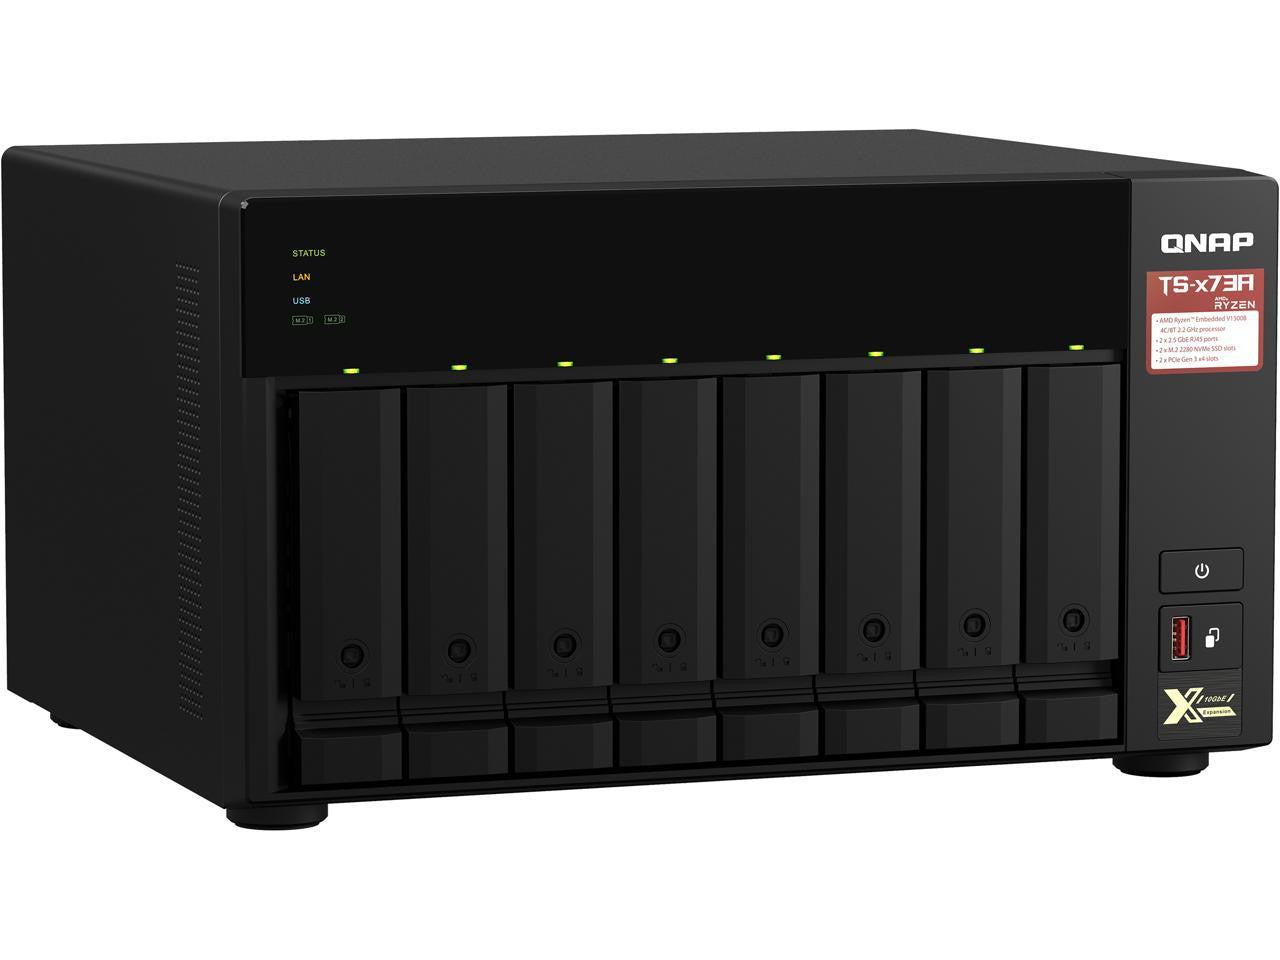 QNAP TS-873A 8-BAY NAS with 32GB DDR4 RAM and 24TB (8x3TB) Seagate Ironwolf NAS Drives Fully Assembled and Tested